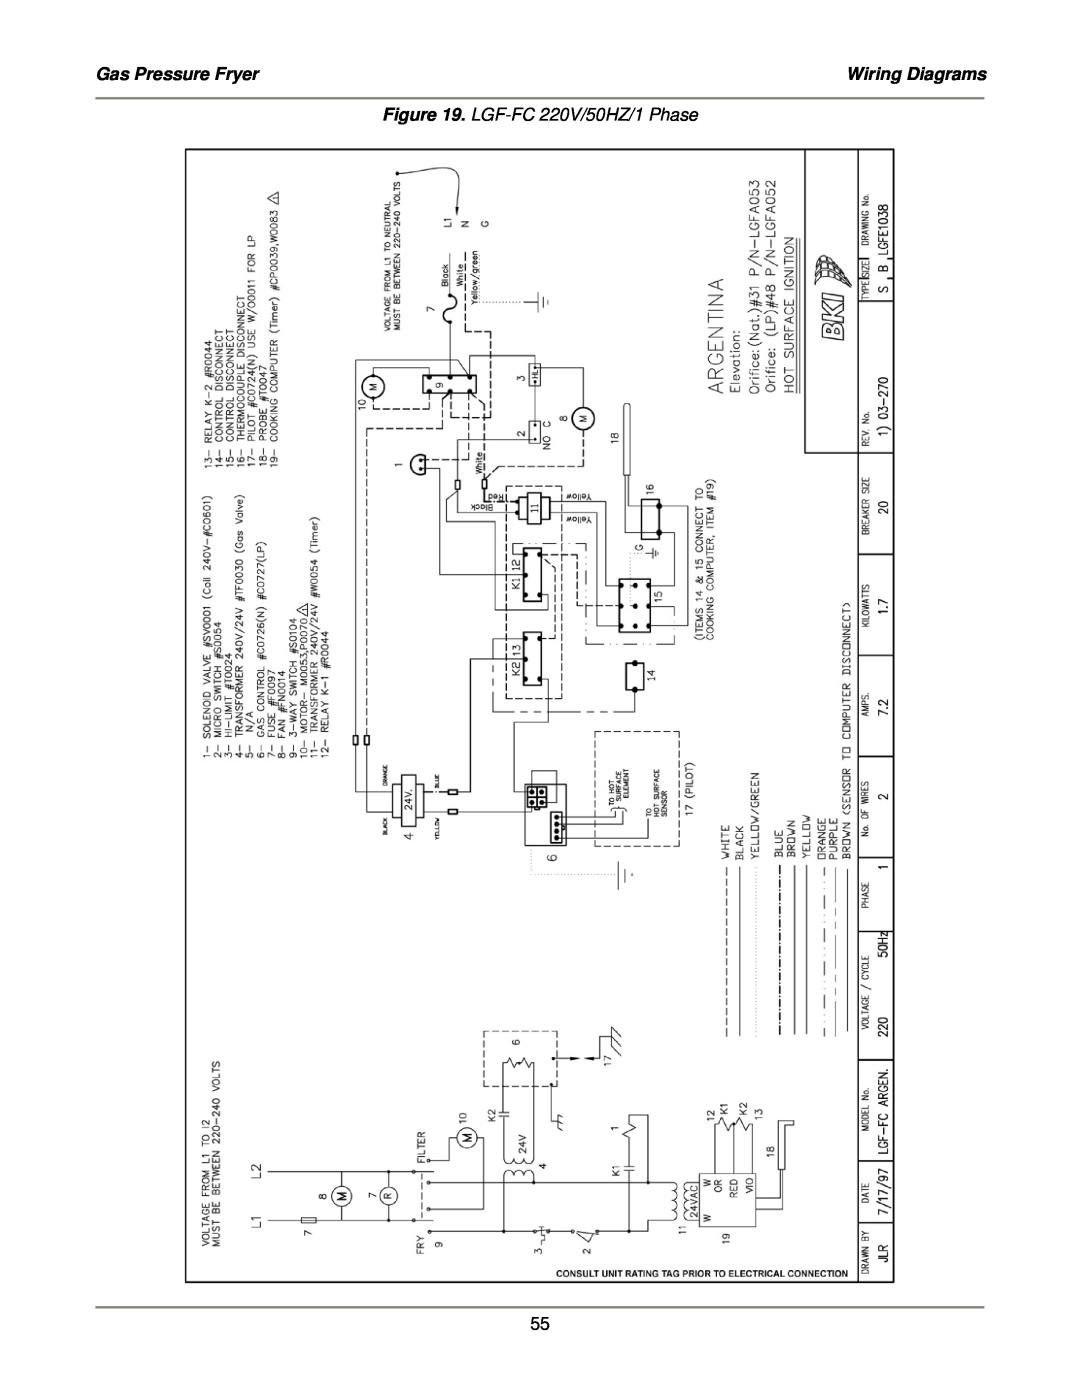 Bakers Pride Oven service manual Gas Pressure Fryer, Wiring Diagrams, LGF-FC220V/50HZ/1 Phase 